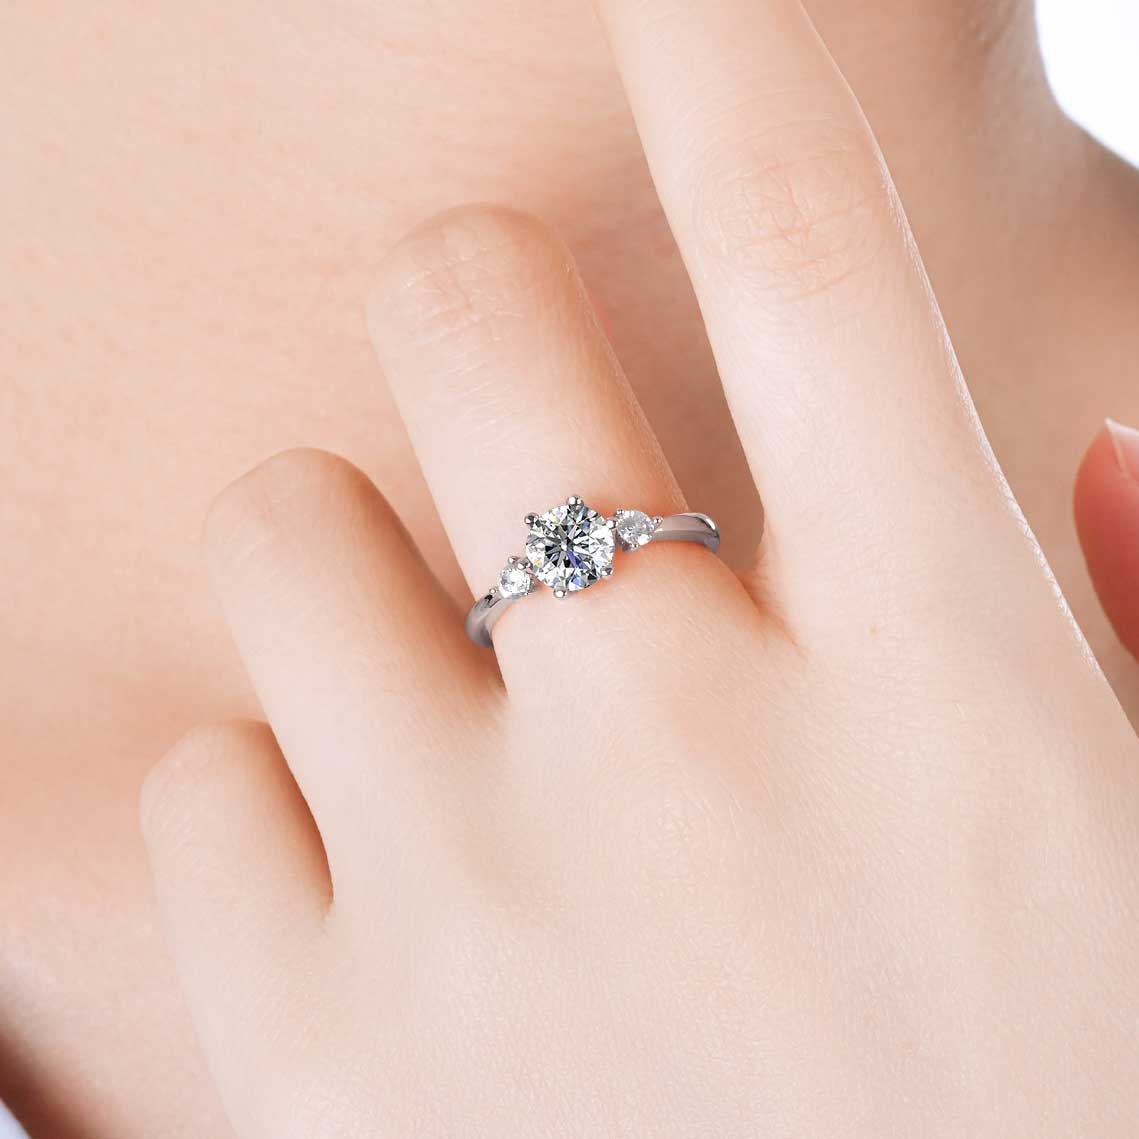 Silver engagement ring moissanite bridal jewellery nz